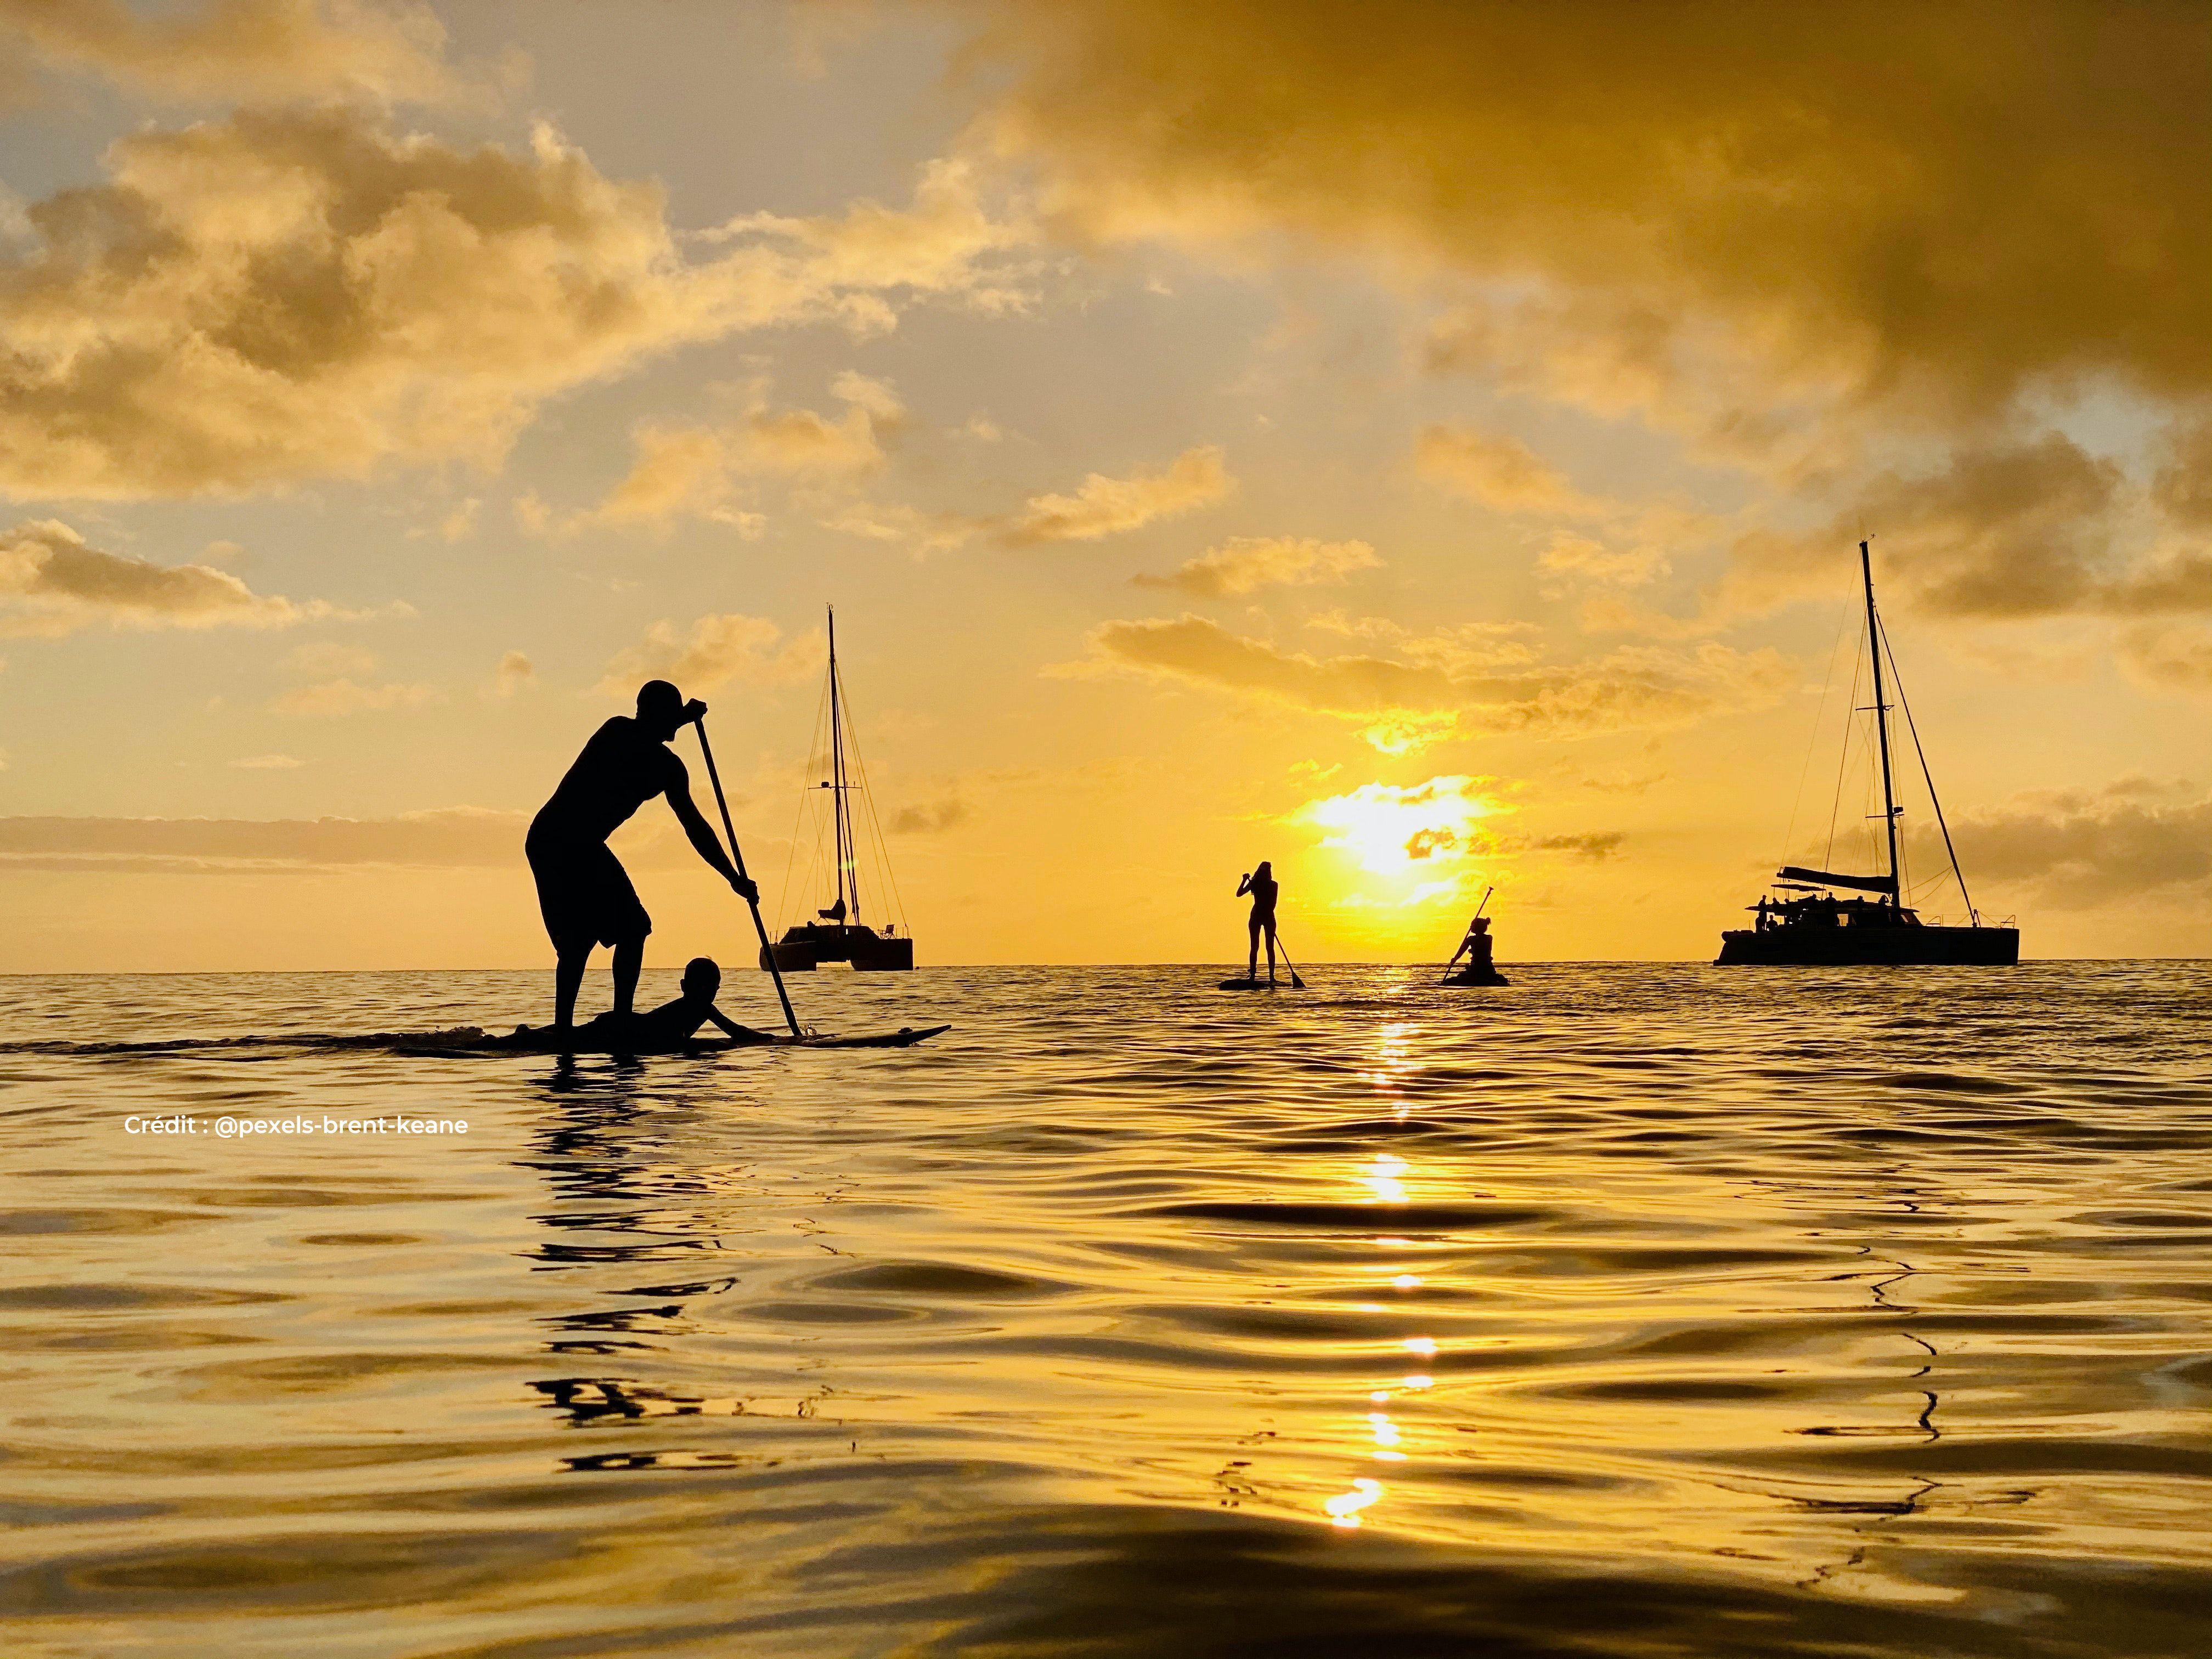 Where can you try out standup paddleboarding during your stay in Nice?